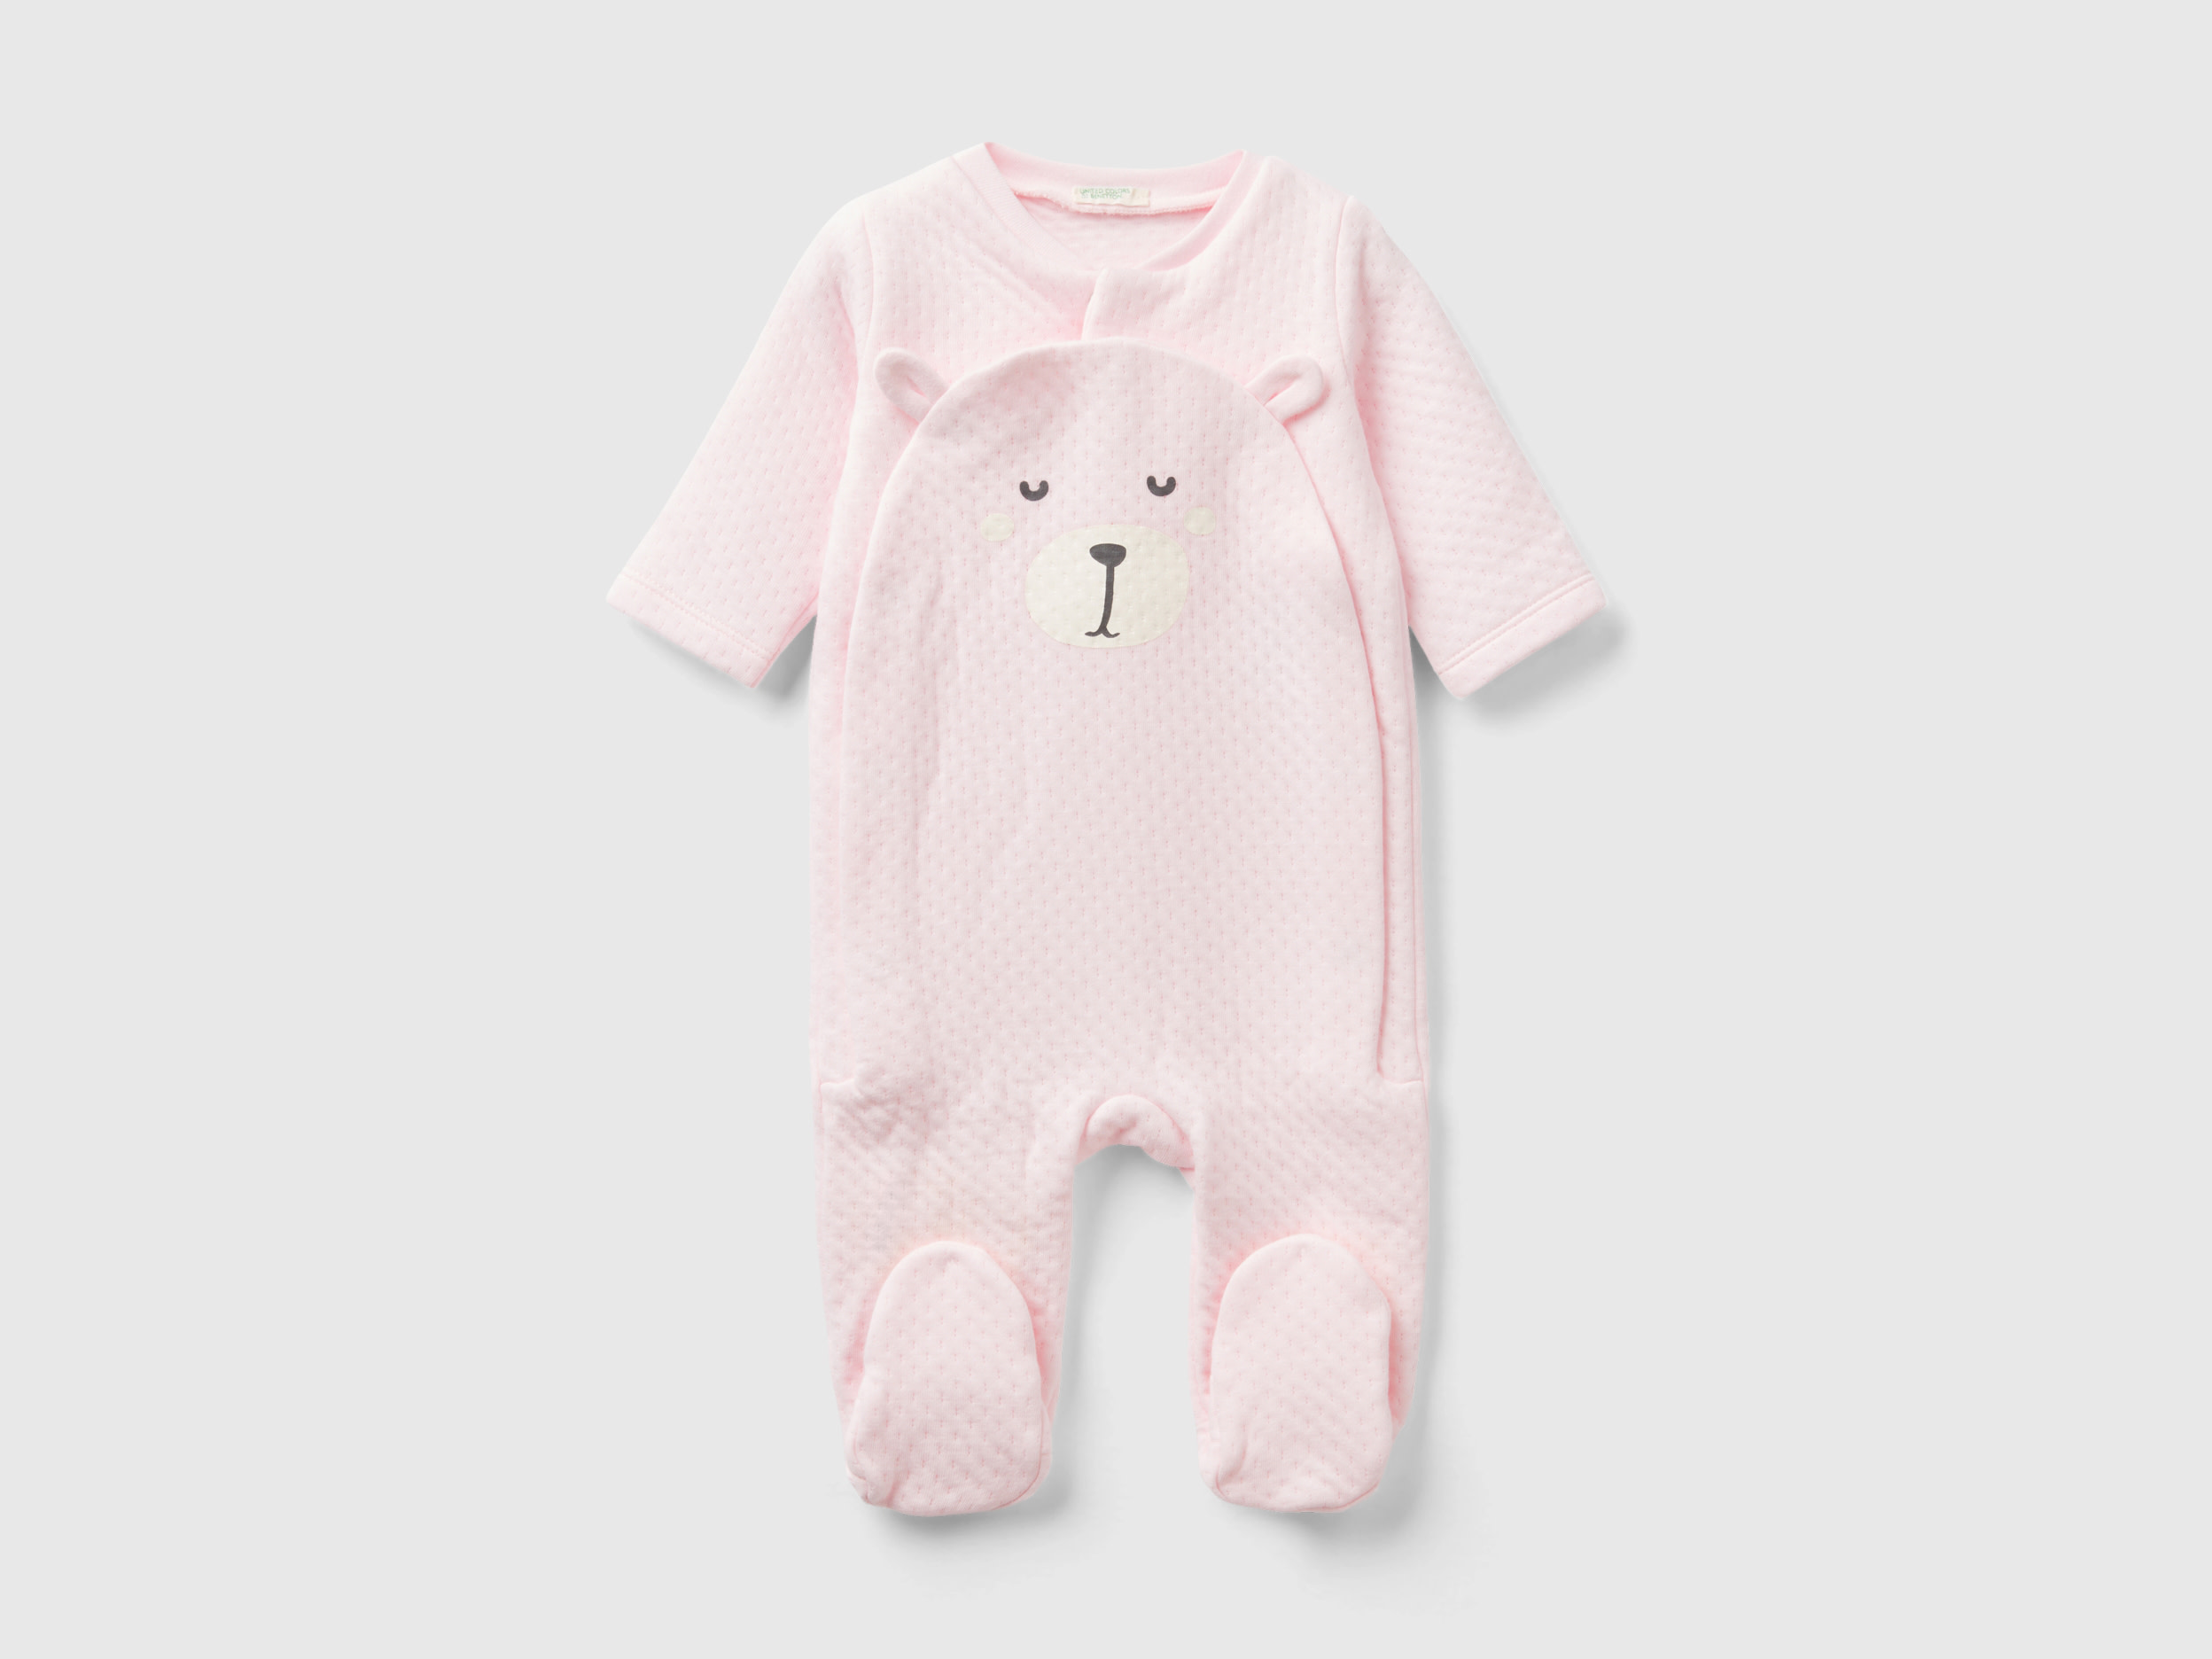 Benetton, Teddy Bear Onesie With Quilted Look, size 1-3, Soft Pink, Kids